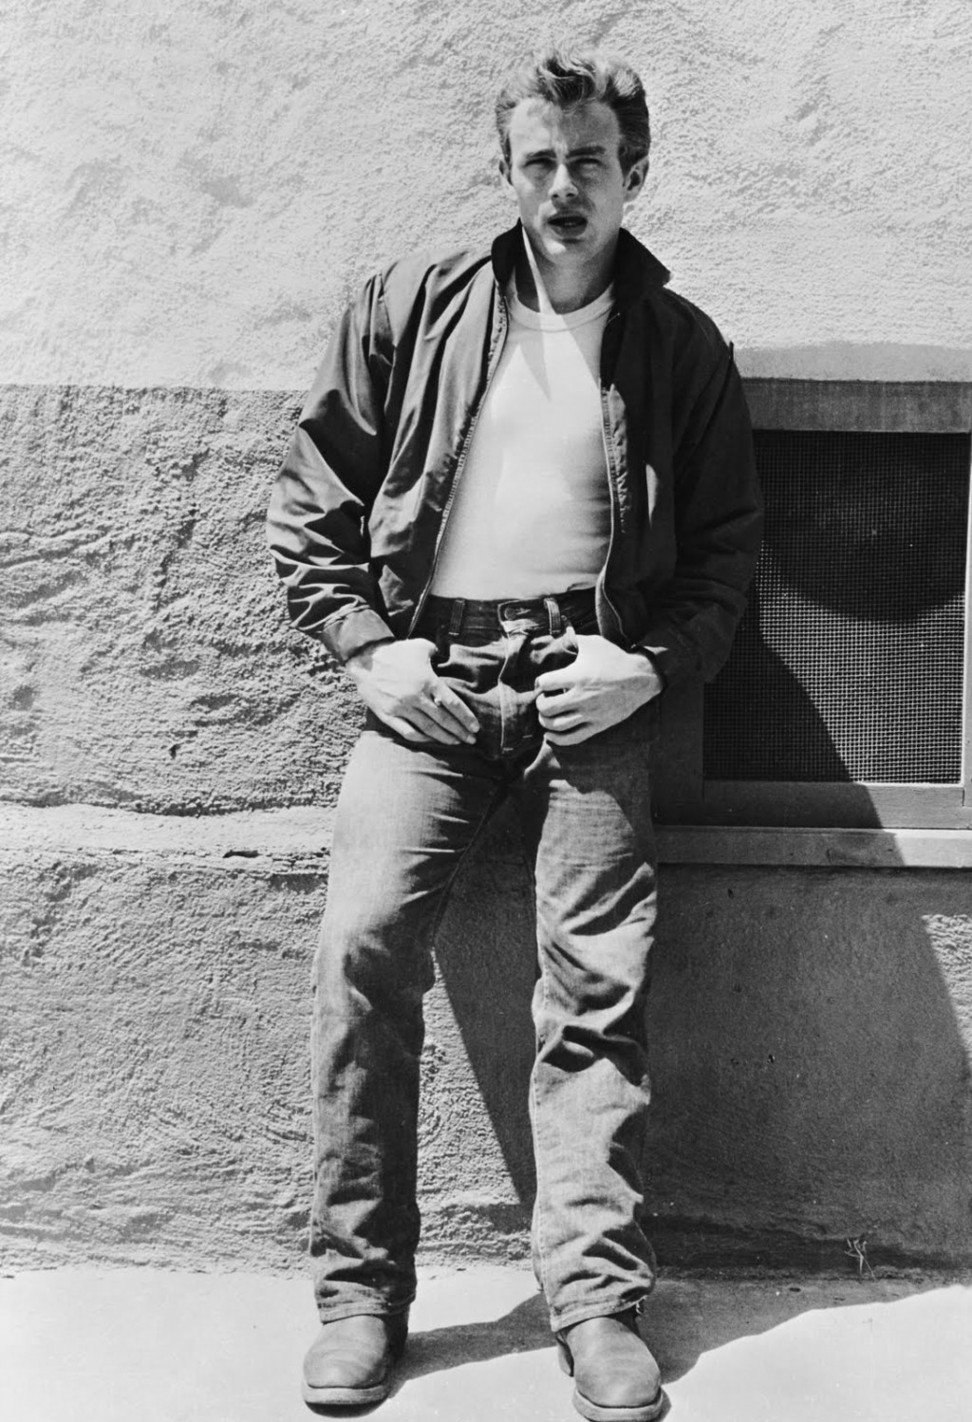 Street Food Cinema - Throwback: May 31, 1955 James Dean wardrobe test for  his last movie, GIANT. He passed away 4 months later at 24. GIANT was  released one year later. He